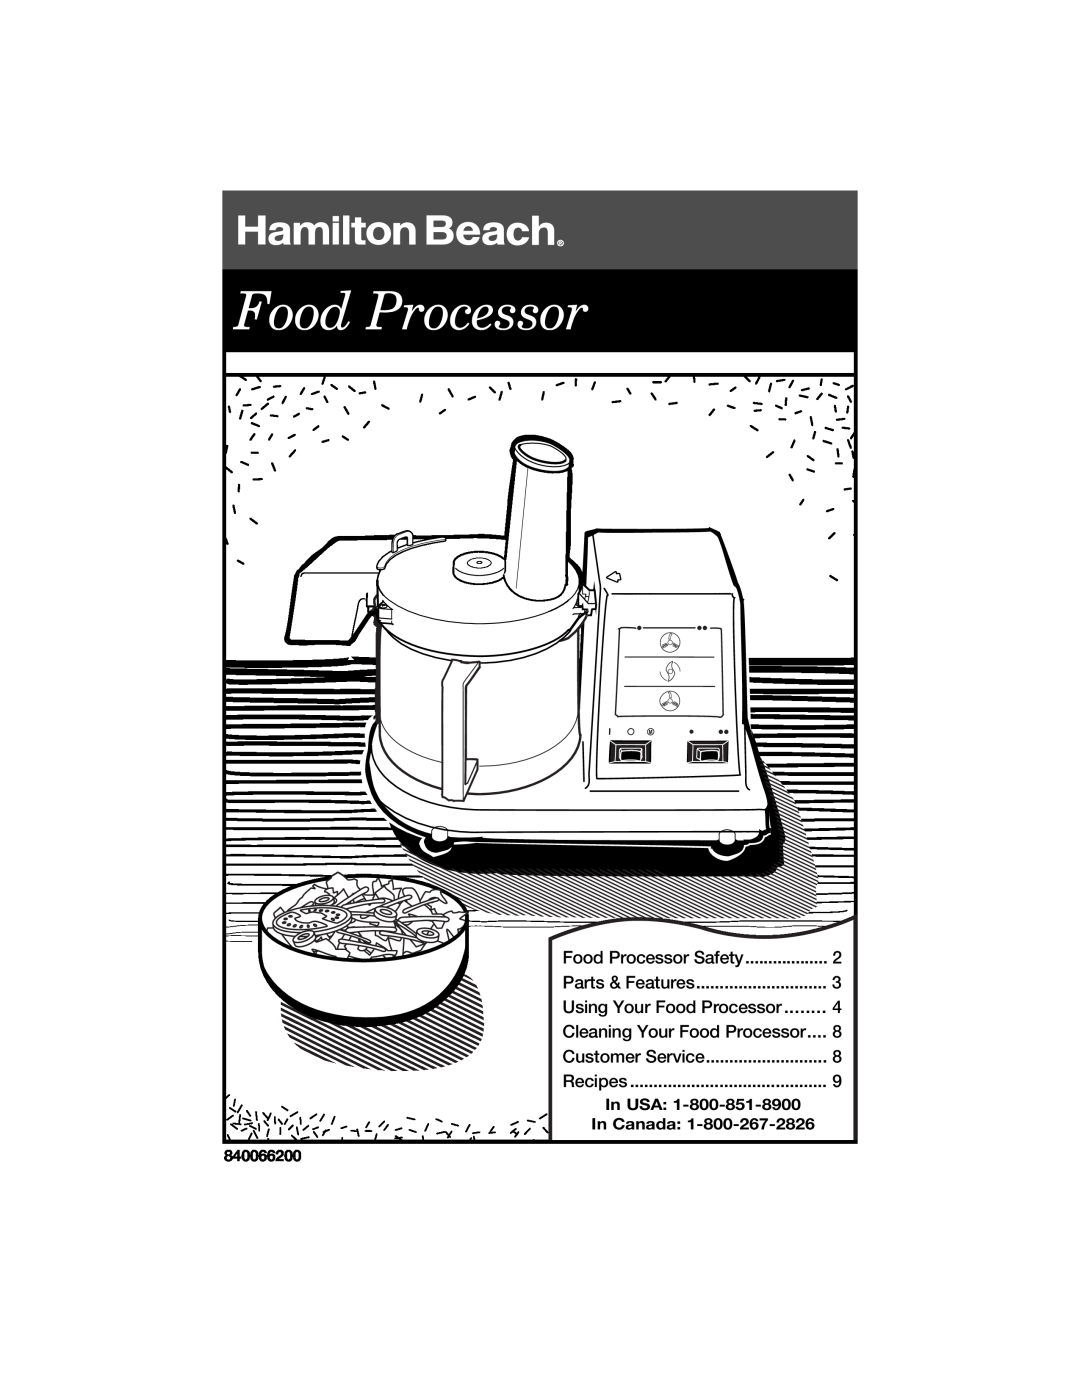 Hamilton Beach 840066200 manual Food Processor Safety, Parts & Features, Customer Service, Recipes, In USA, In Canada 